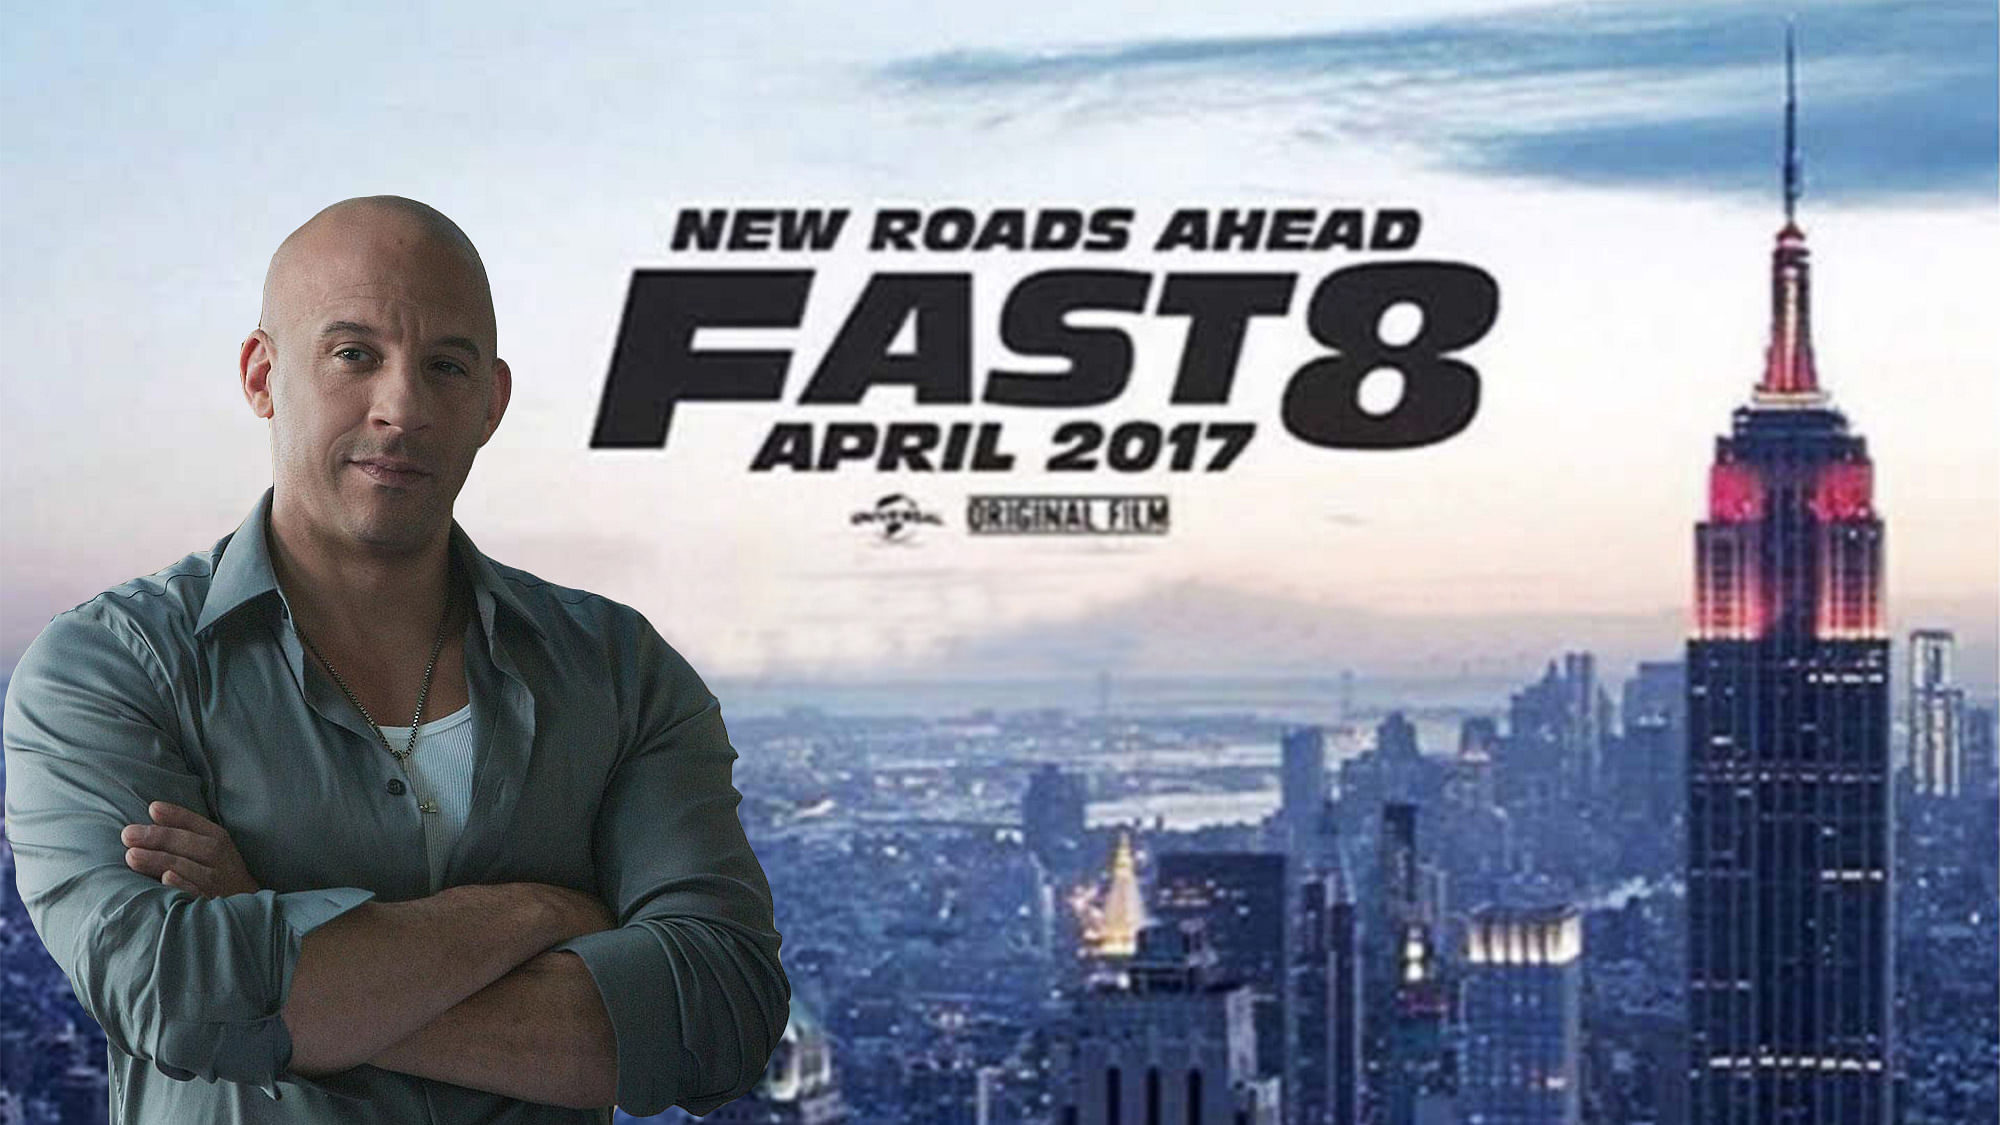 Fast 8 will hit the screens in April. (Photo: Altered by <b>The Quint</b>)